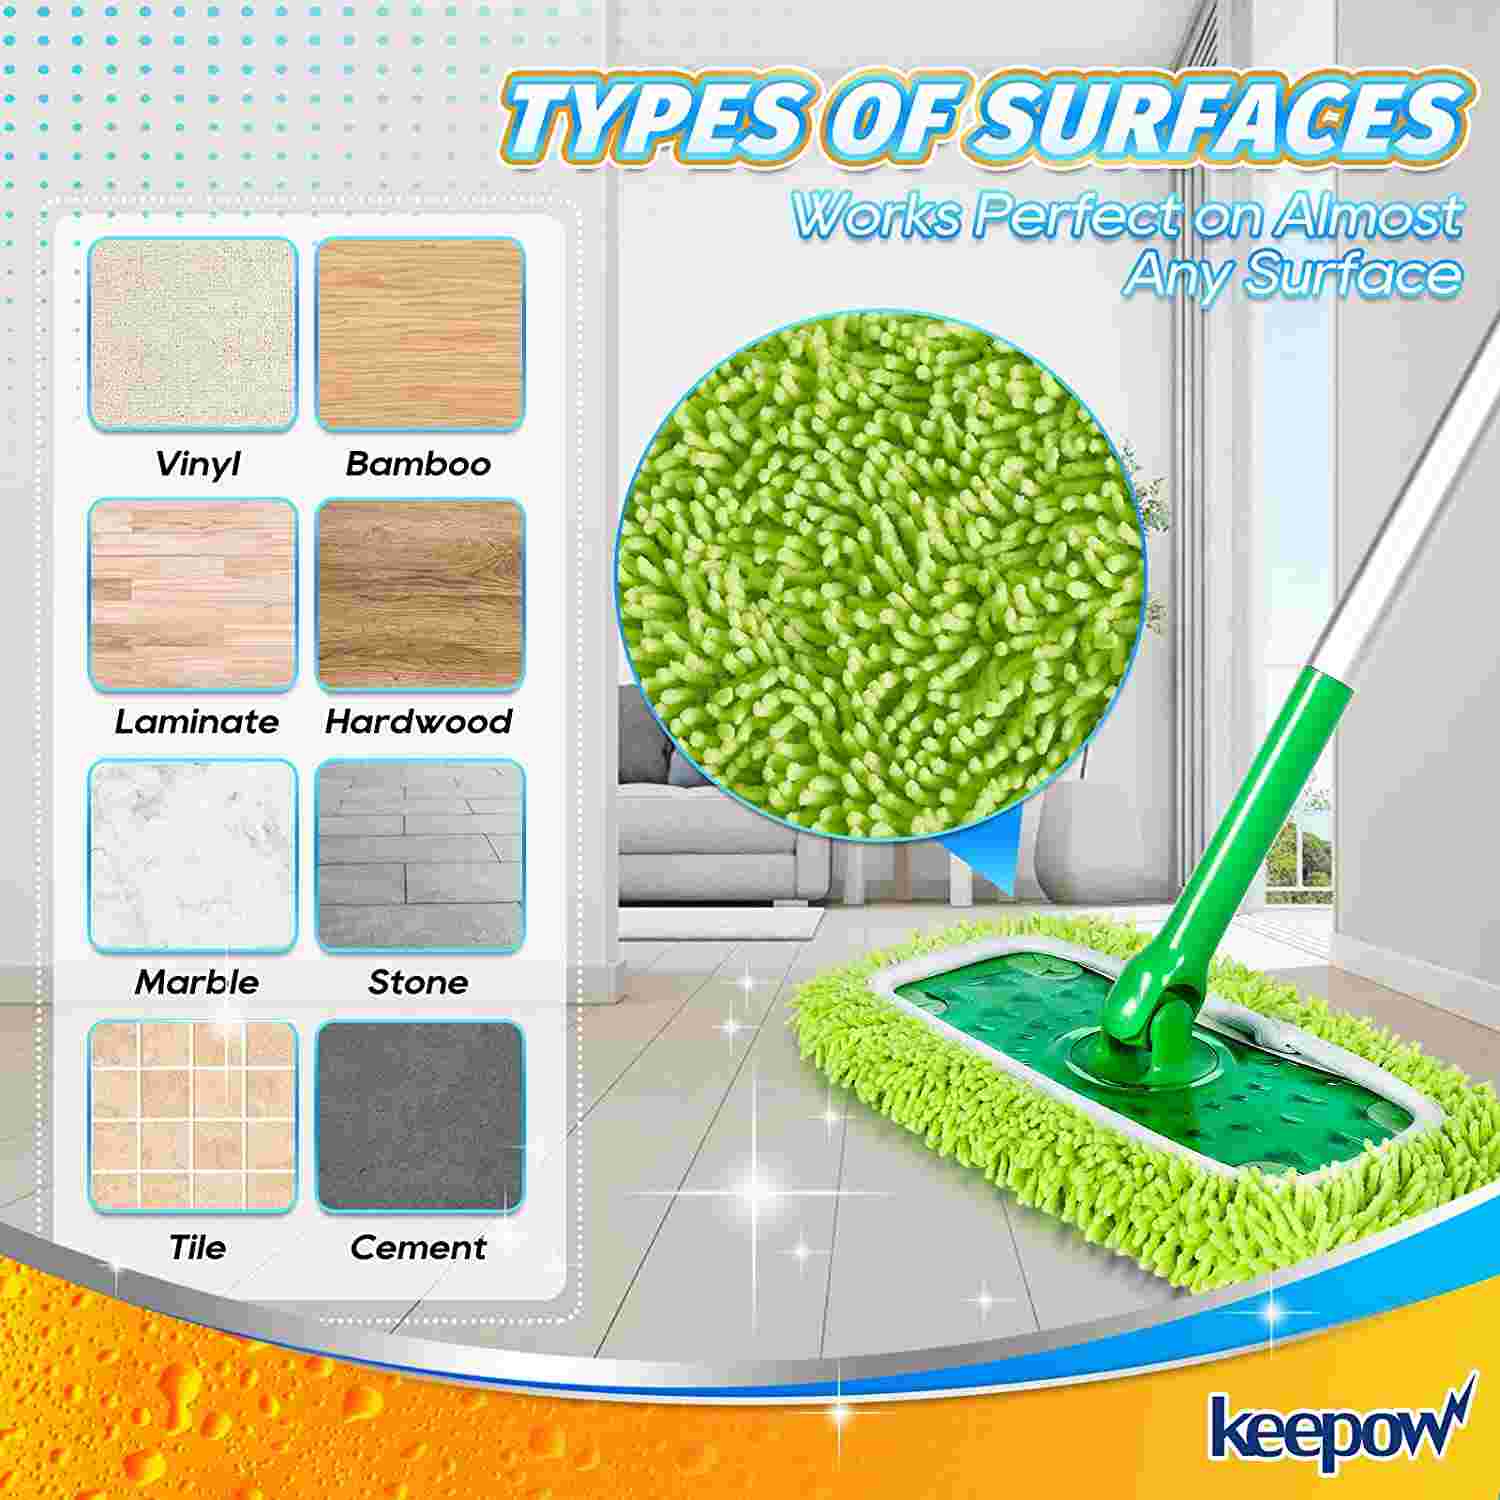 KEEPOW Dry Sweeping/Wet Mopping Cloths for Swiffer Sweeper, Reusable & Washable Microfiber Mop Pads Refills for Hard-Surface/Hardwood Floor Cleaning, 6 Pack (Mop is Not Included)